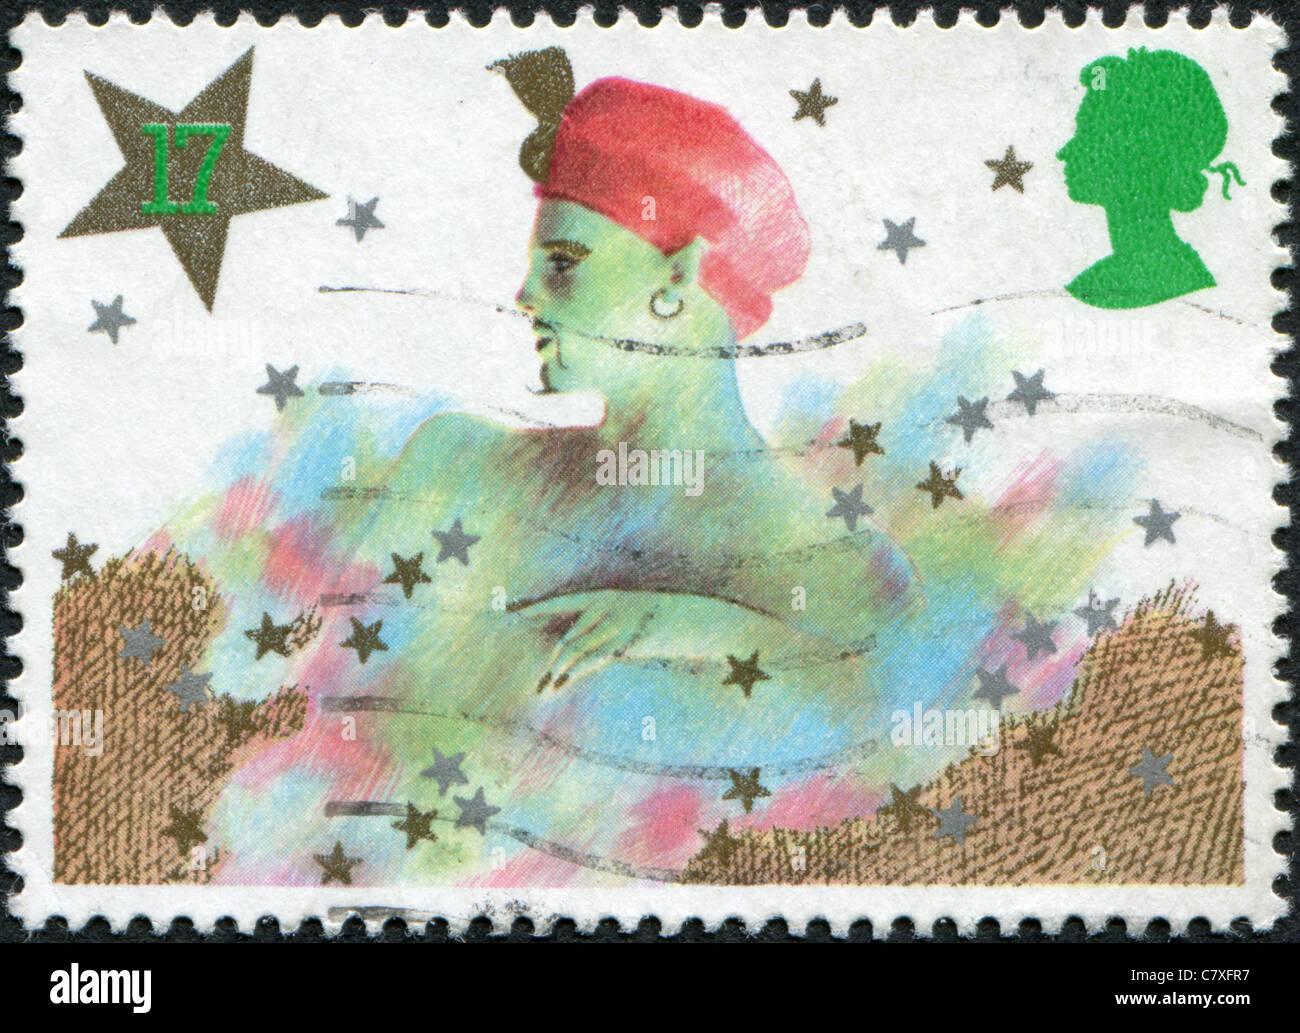 UNITED KINGDOM - 1985: A stamp printed in England, shows a Christmas Pantomime: Genie Stock Photo